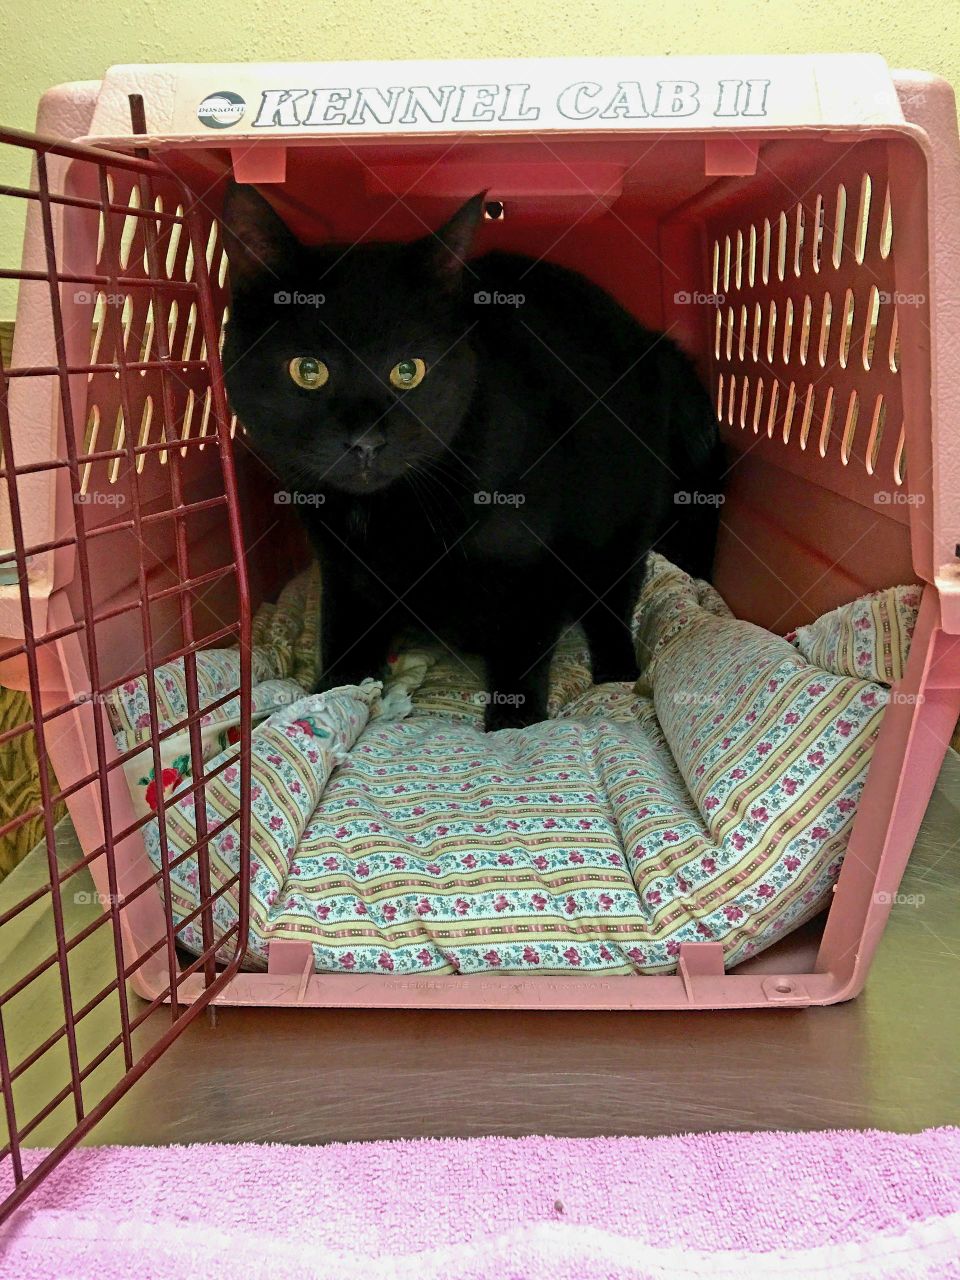 Cat at Vets with cage door open, blanket inside. Scared kitty.